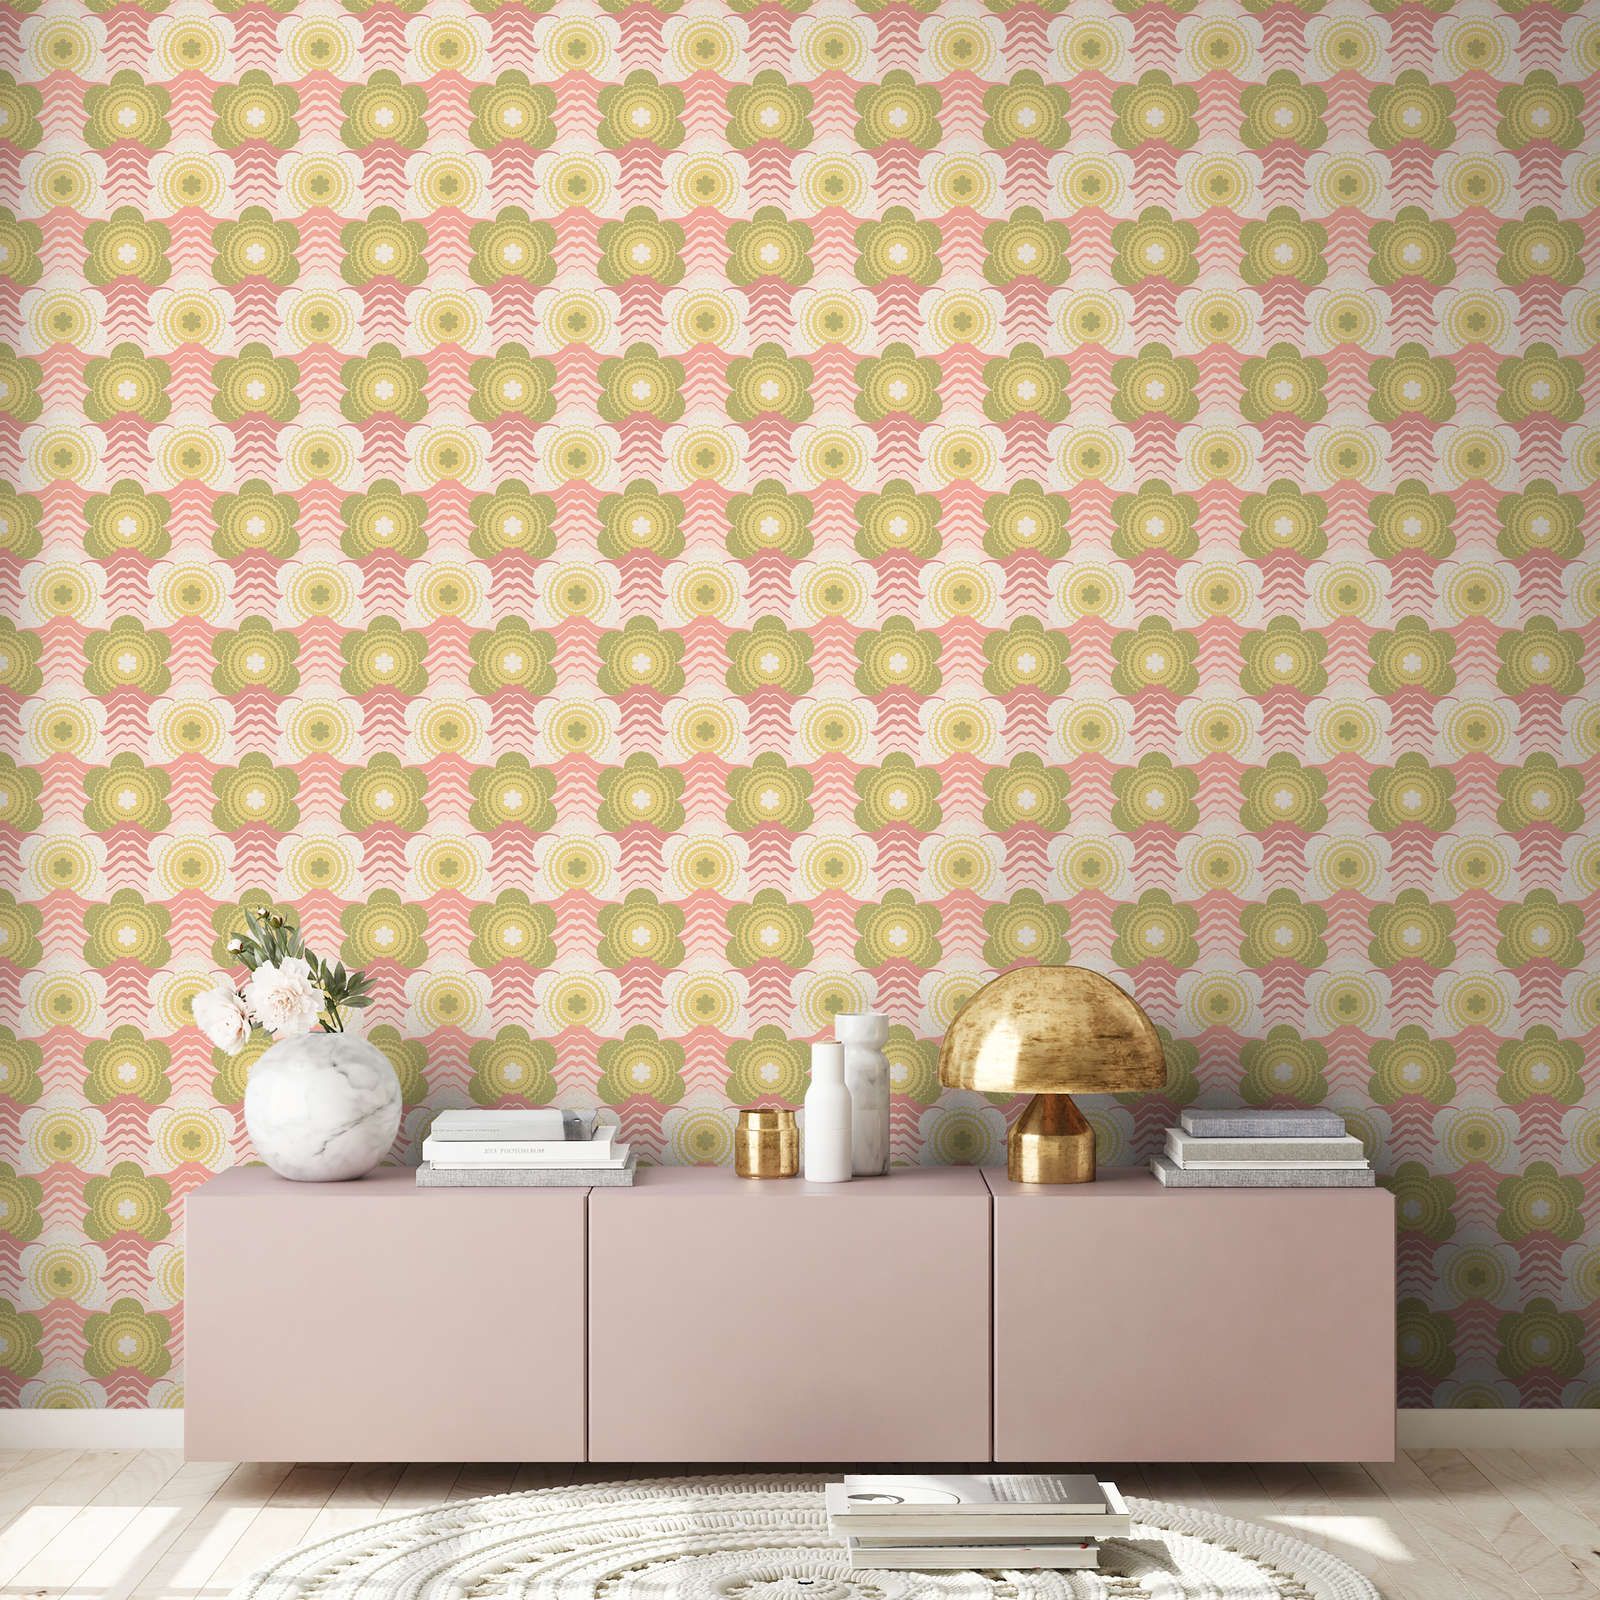             Retro style waves and flowers pattern on lightly textured wallpaper - pink, green, cream
        